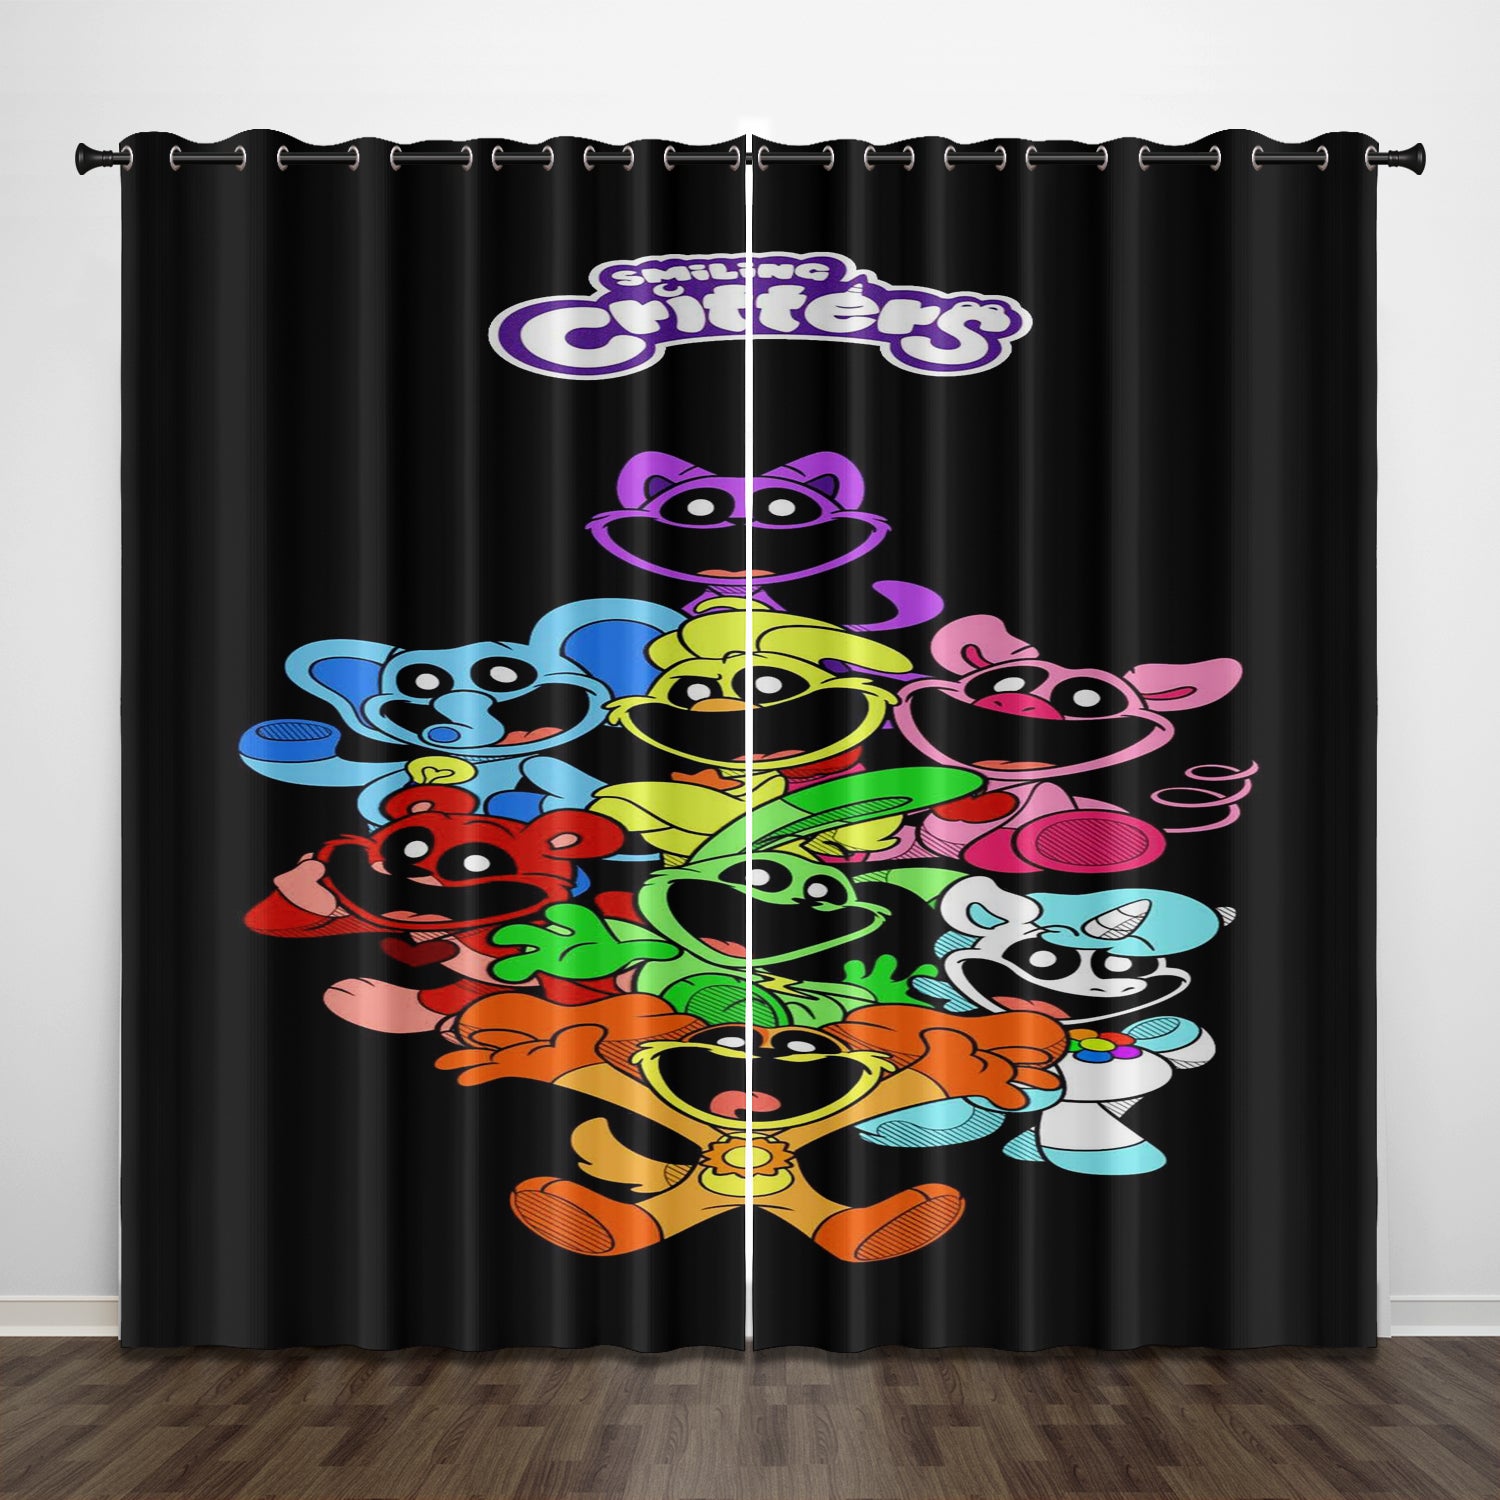 Smiling Critters Blackout Curtains Drapes For Window Treatment Set